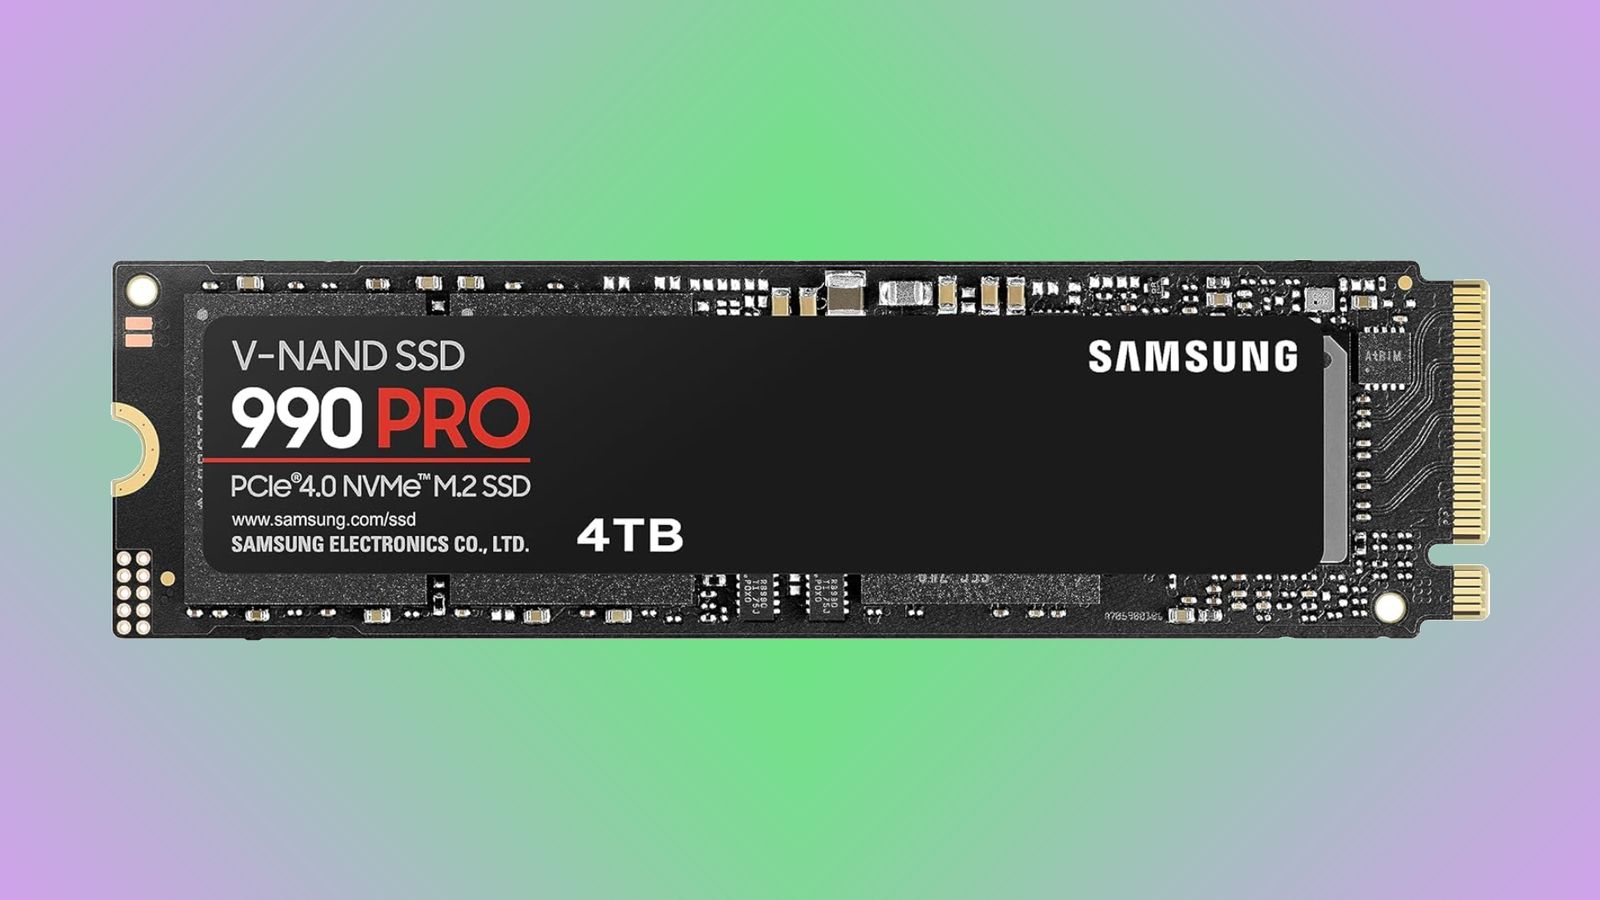 Samsung 990 Pro product image of a black SSD with gold connections featuring white and red branding.